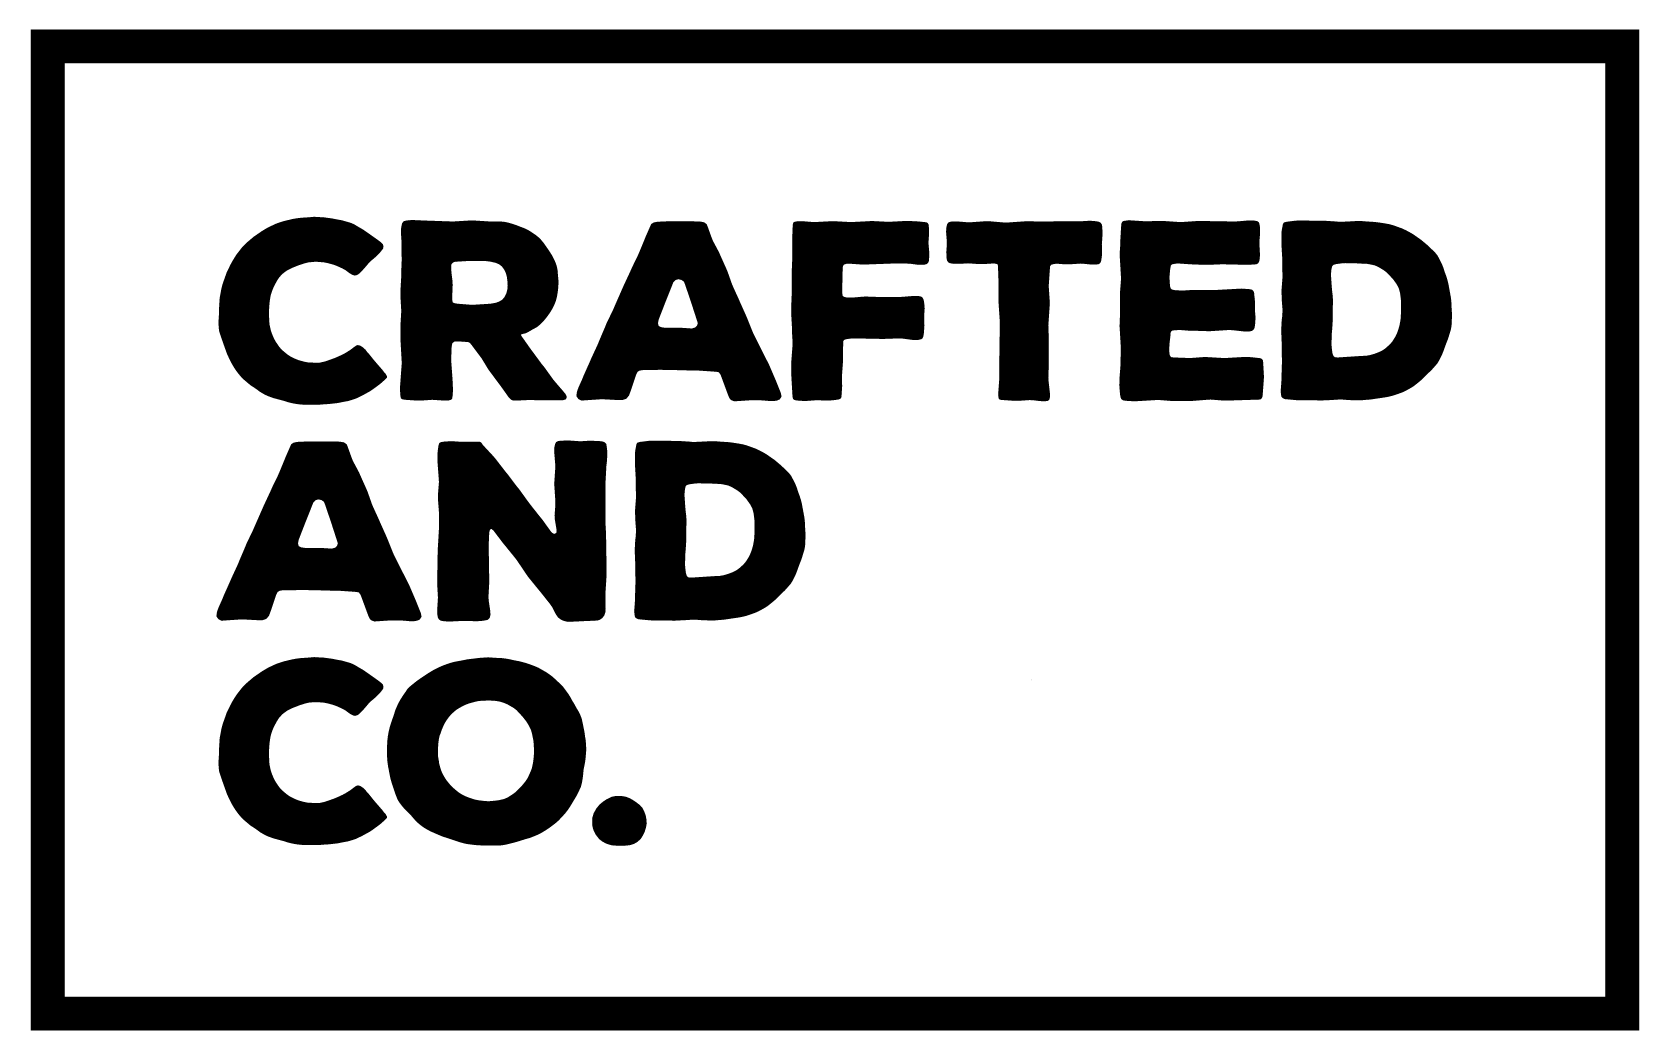 THE CRAFTED AND CO.